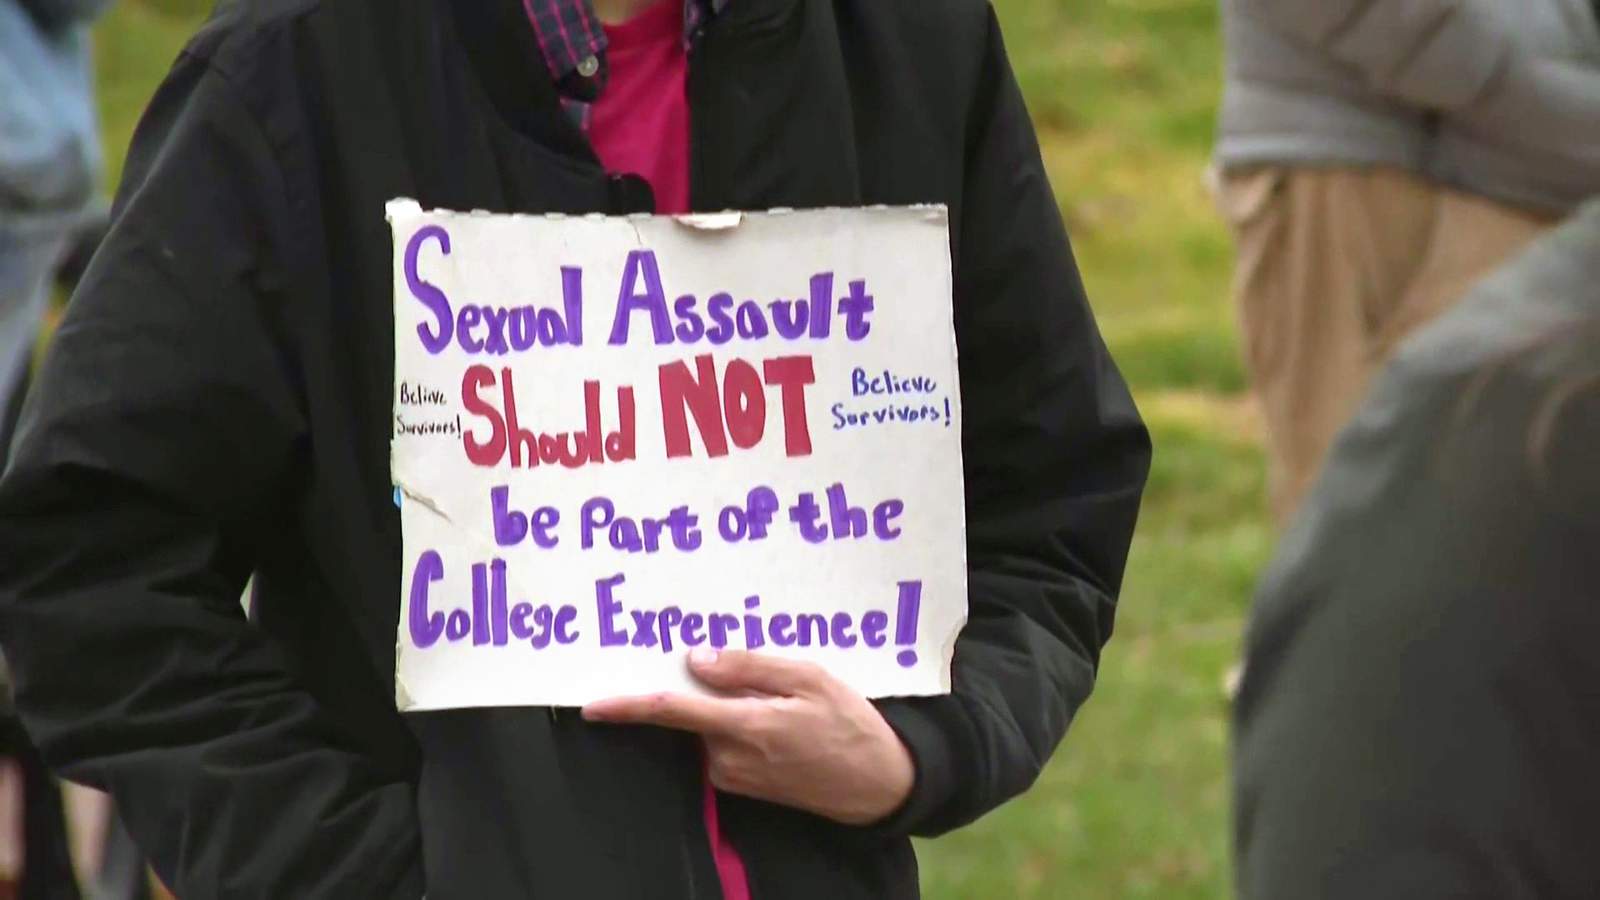 Large protest held over Eastern Michigan University‘s handling of sexual assault reports